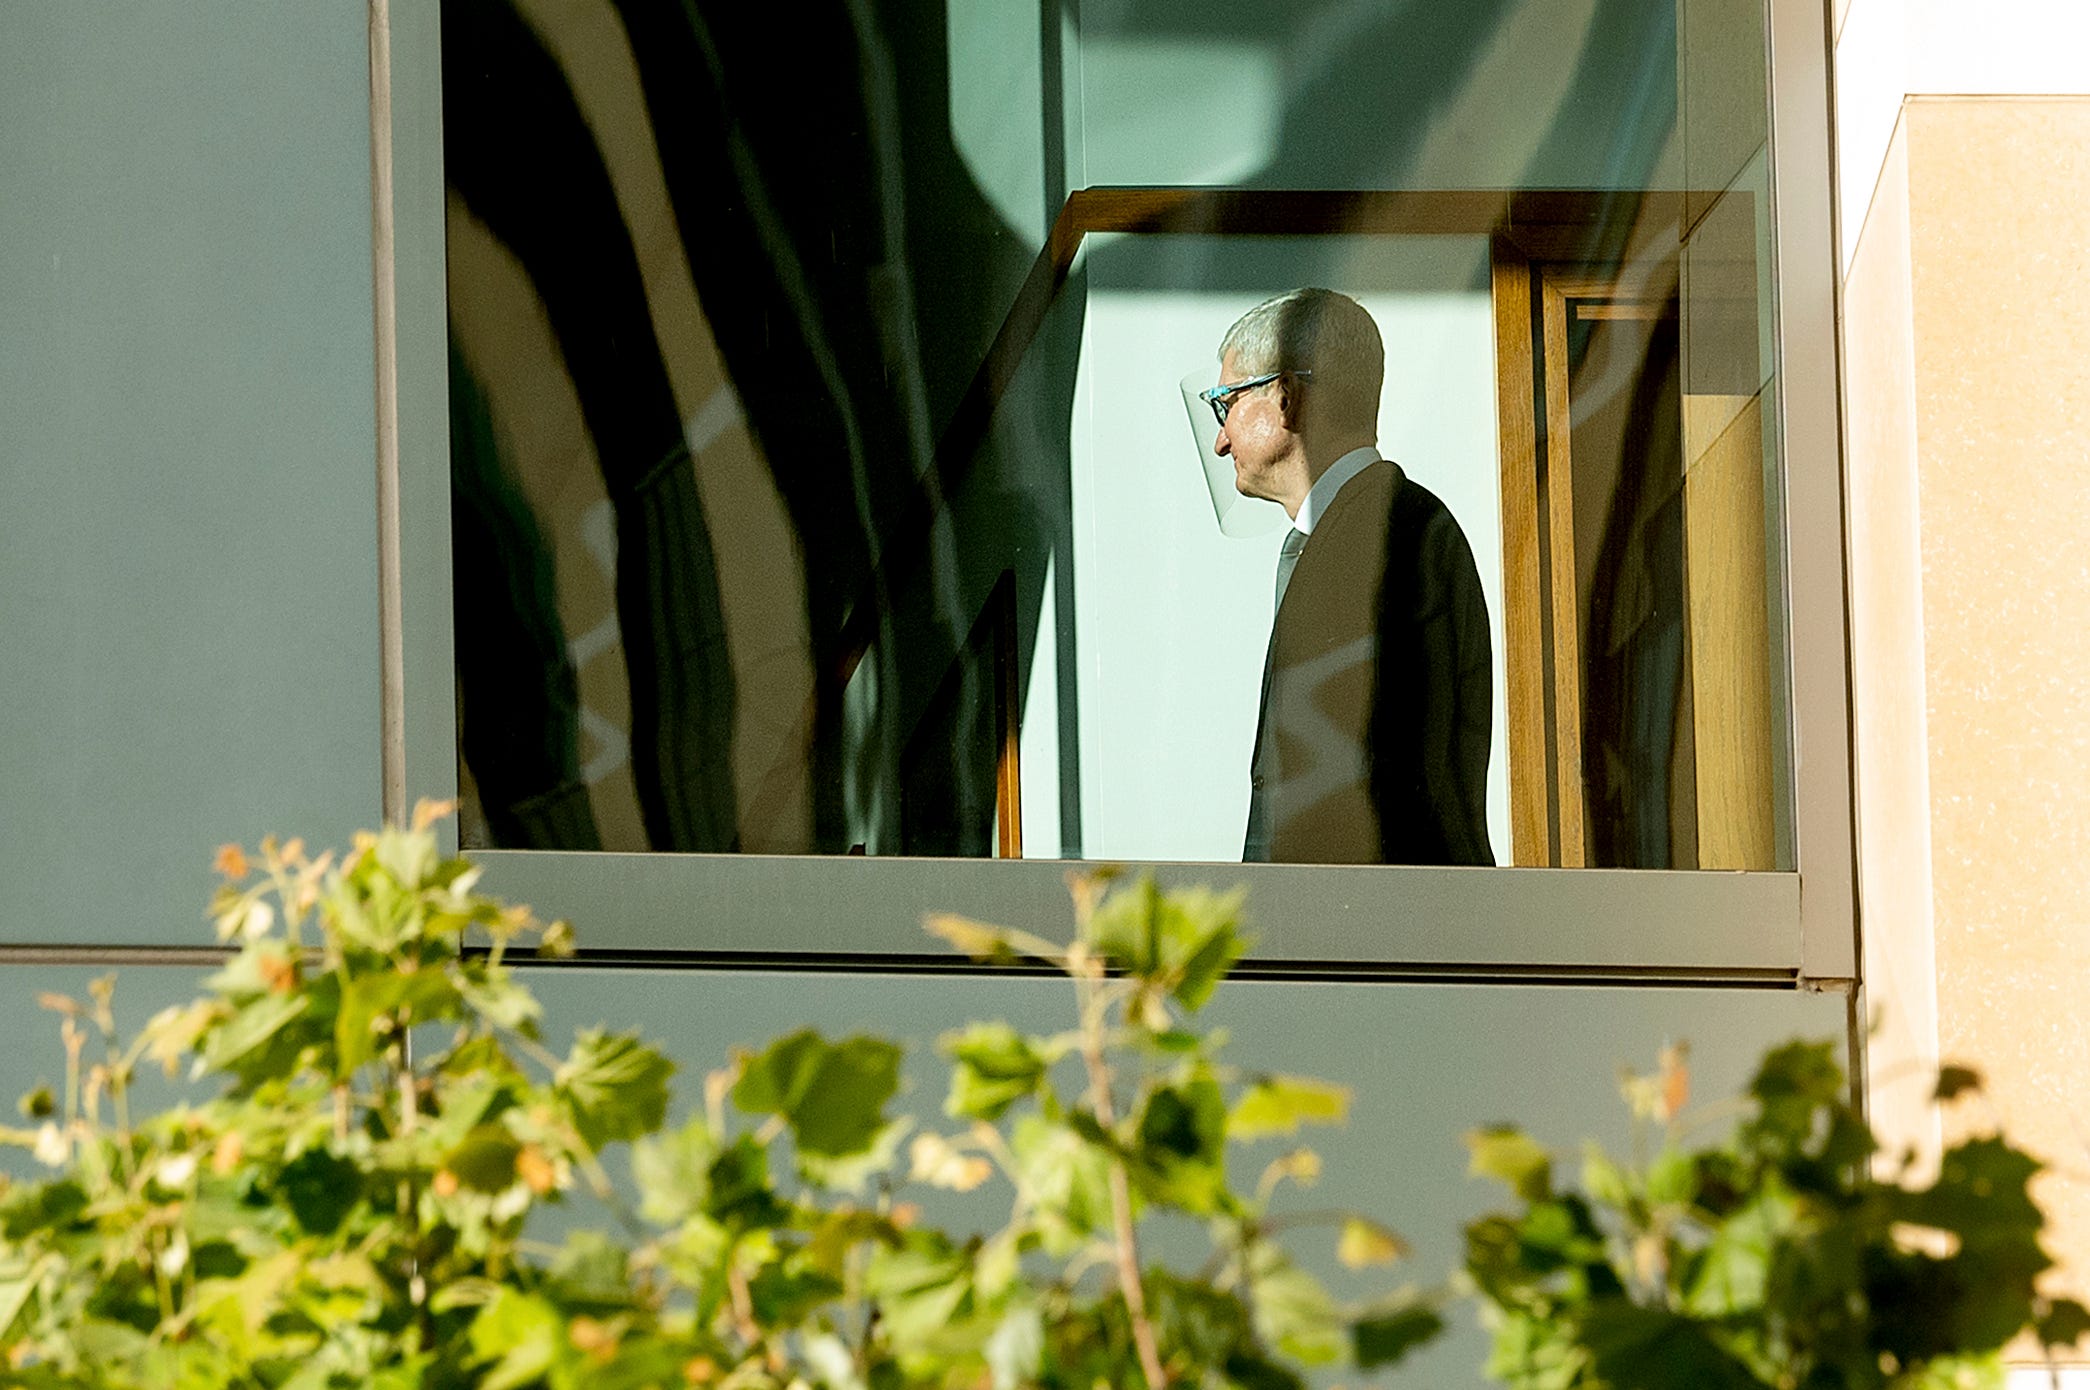 Apple CEO Tim Cook wears a suit and a clear face shield behind a window on a sunny day